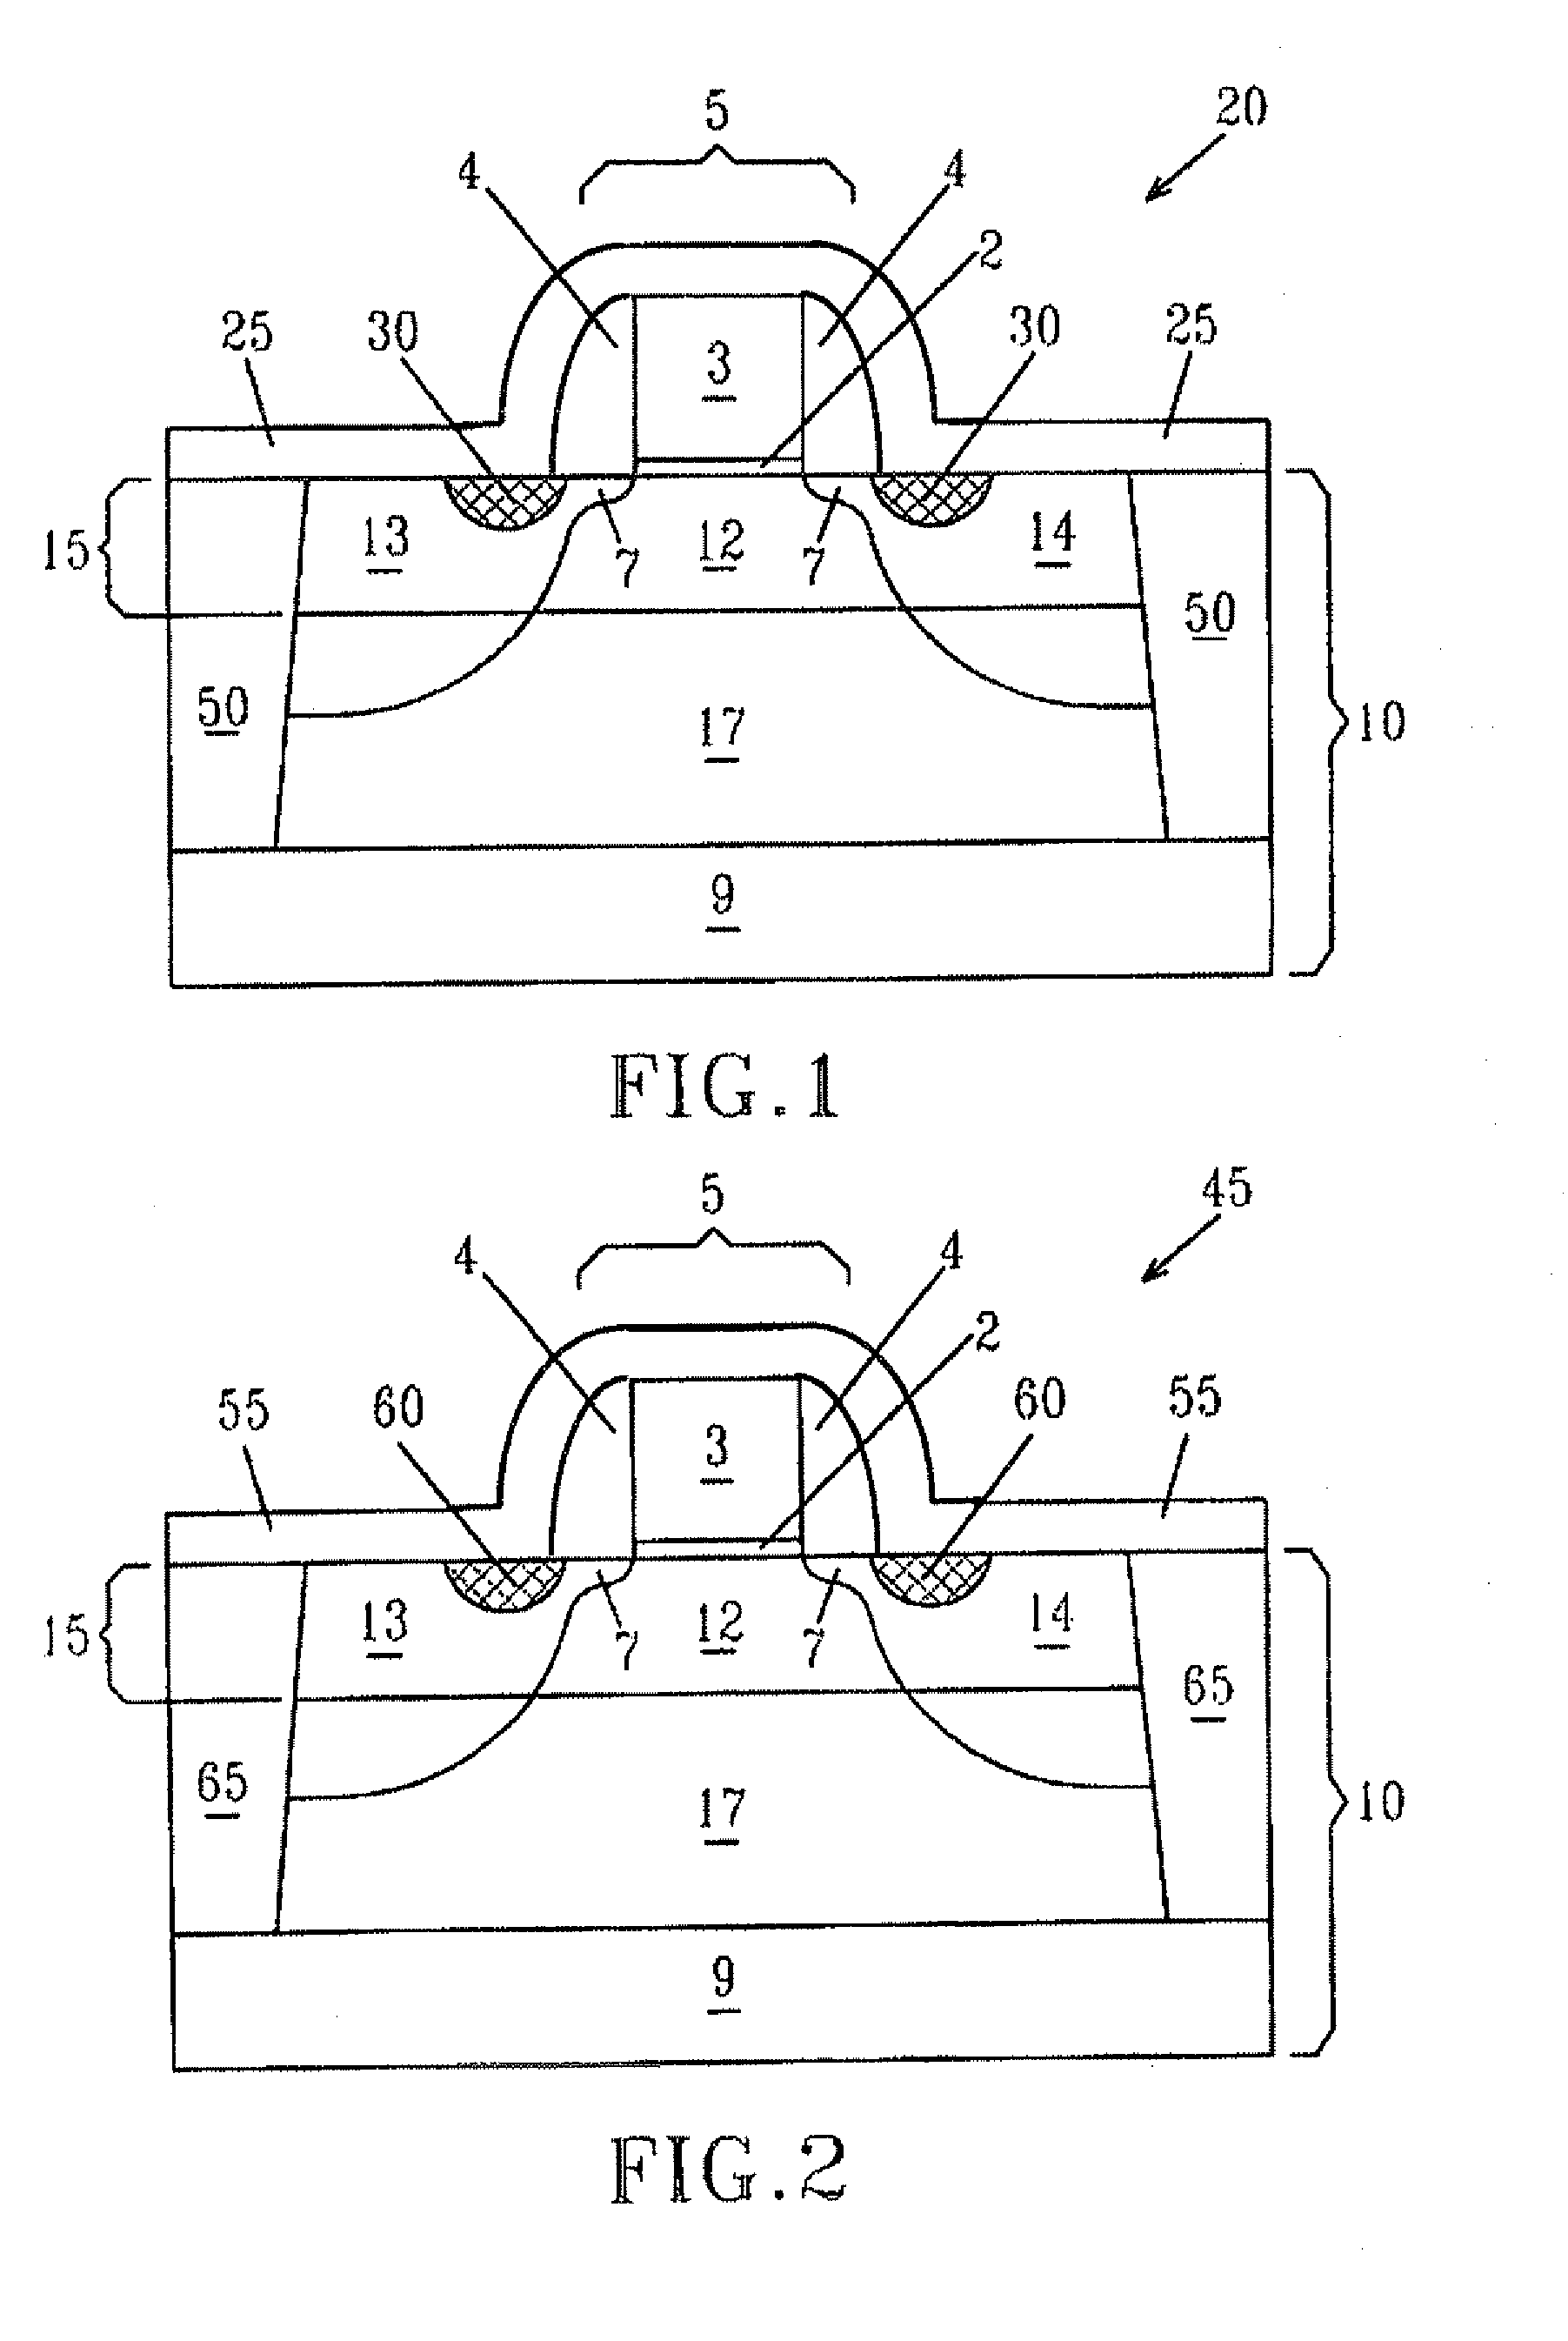 Strained-silicon CMOS device and method